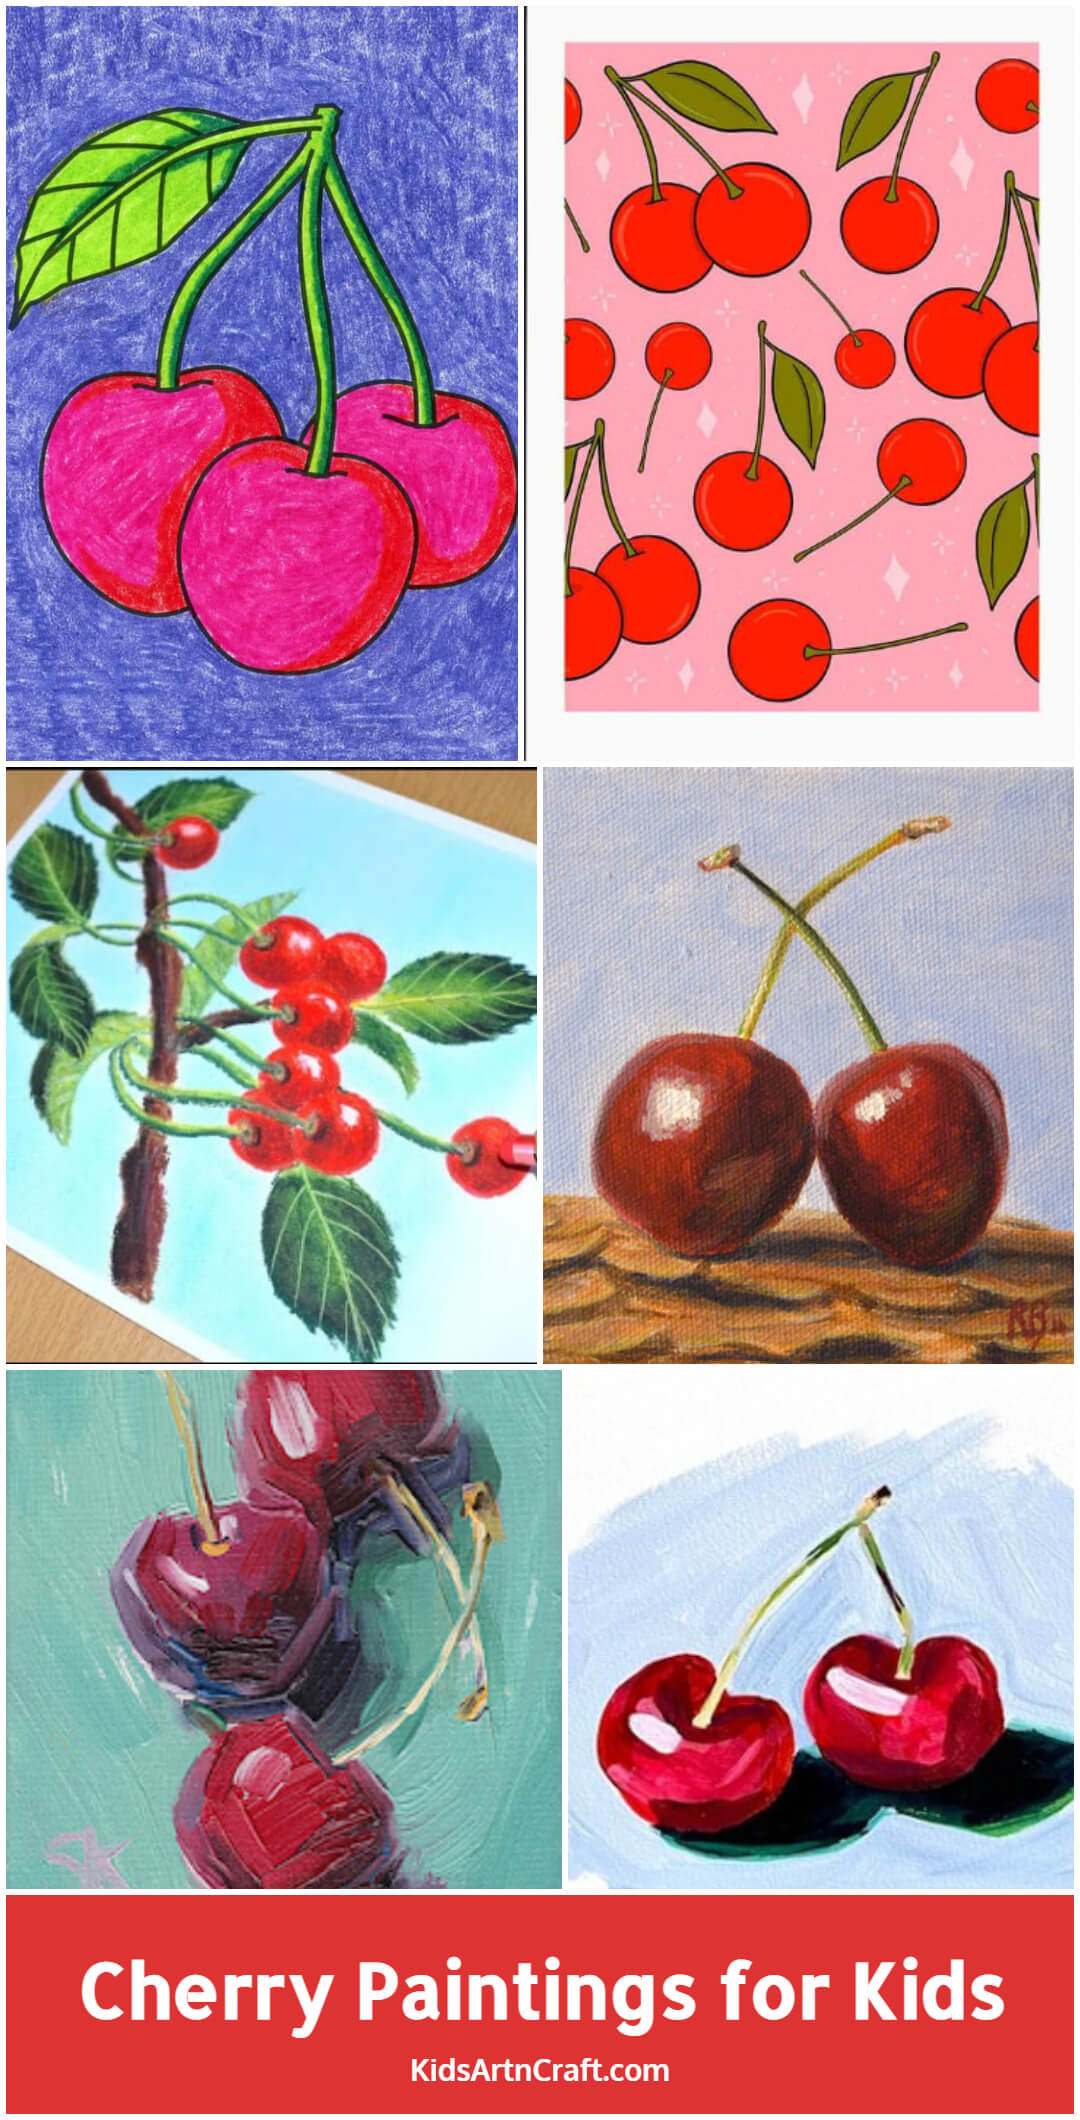 Cherry Paintings for Kids